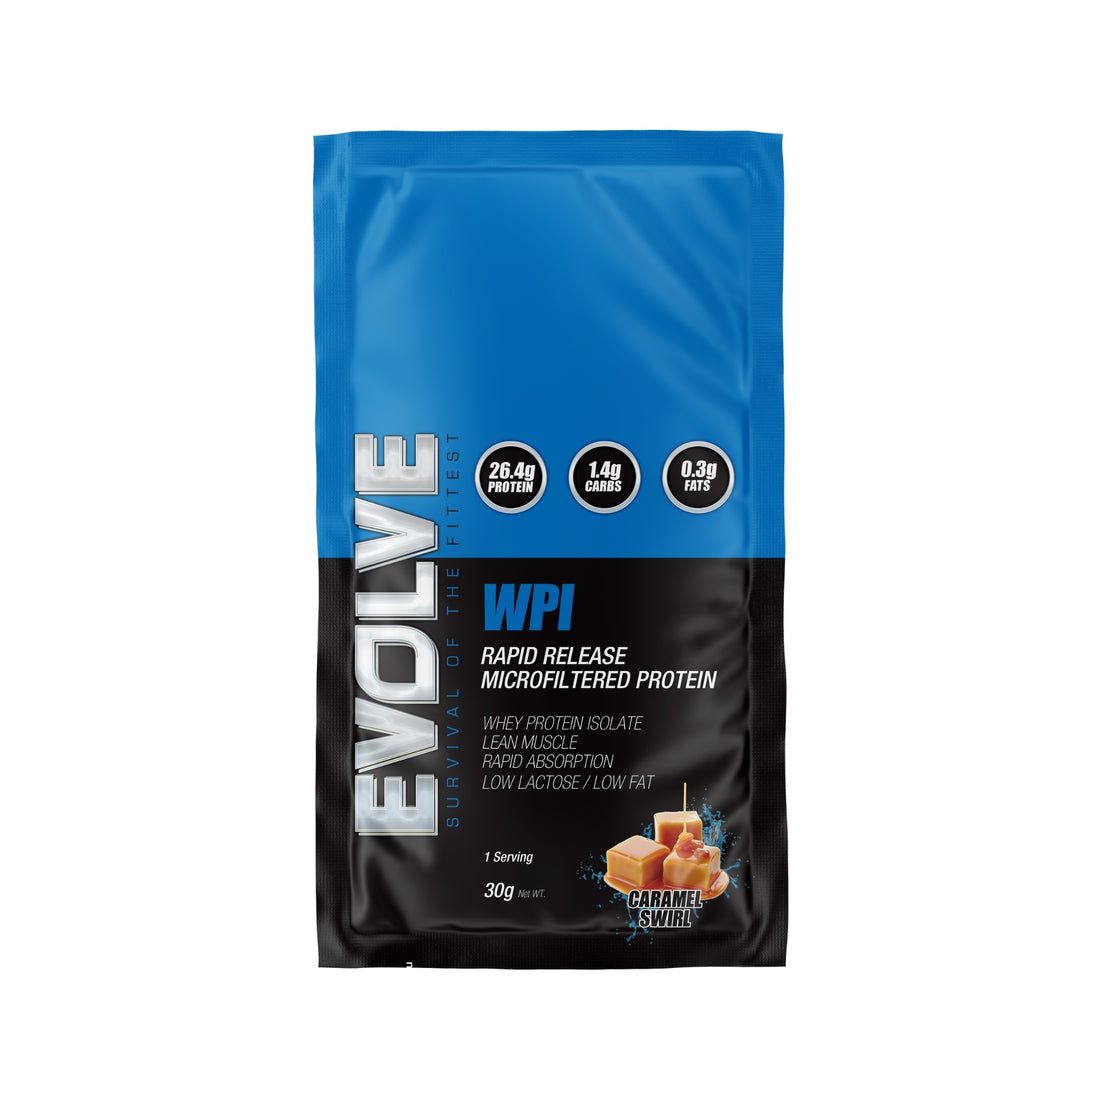 Evolve Nutrition Whey Protein Isolate Protein Powder Sample Supplement